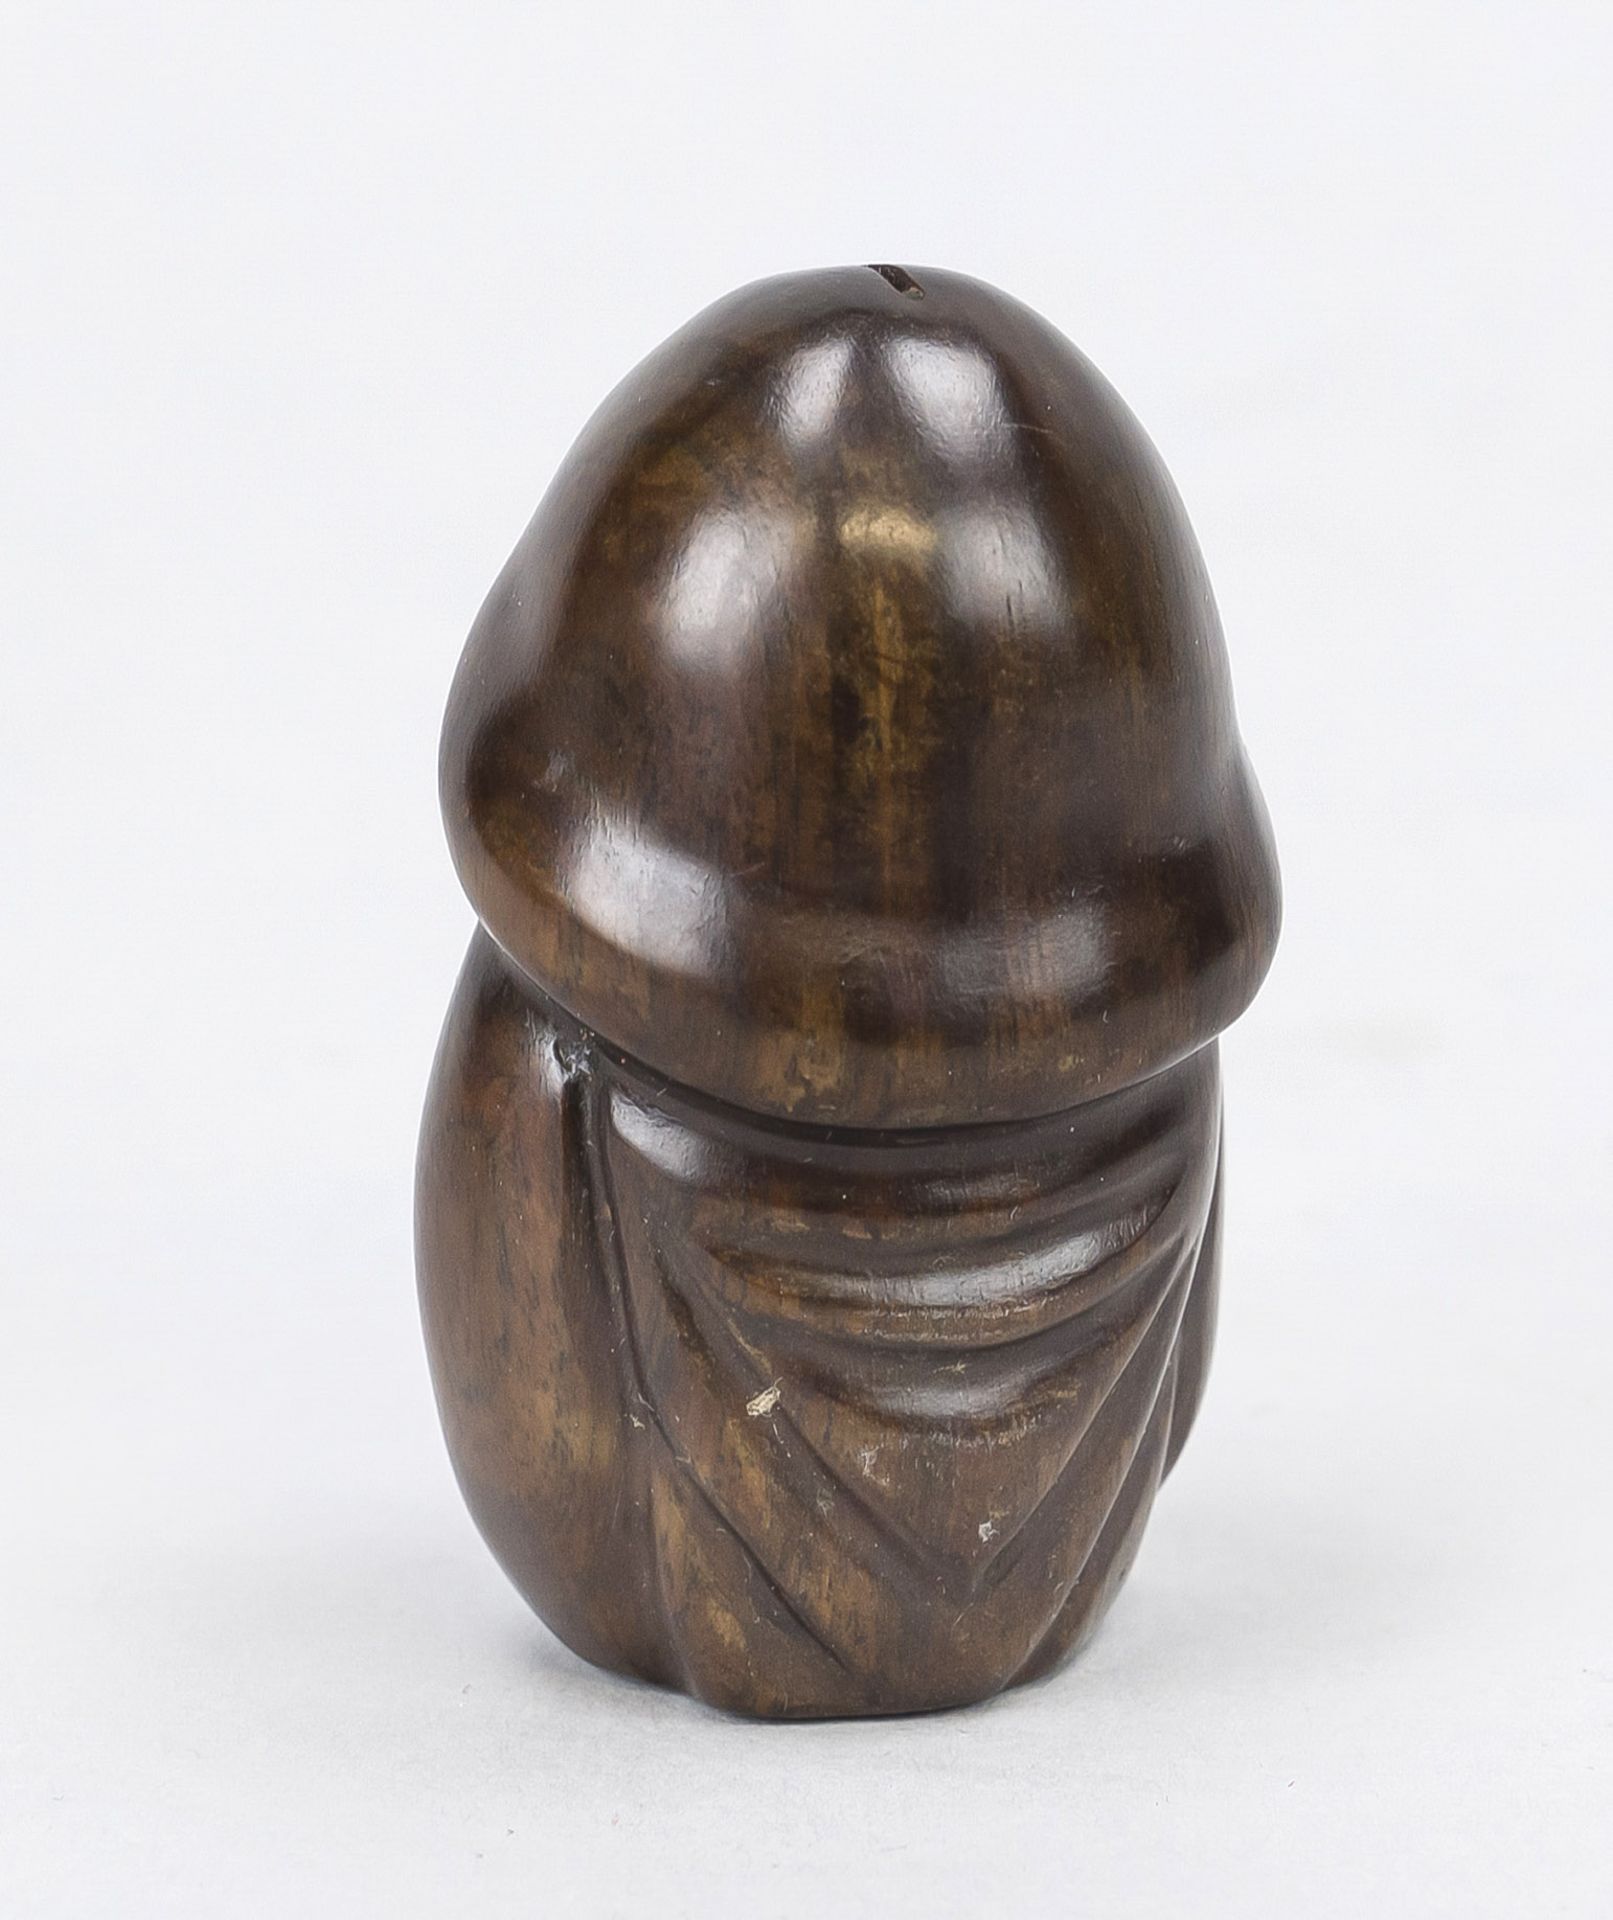 Erotic netsuke, Japan, 19th/20th century, probably boxwood carving with both sexes. Signed below the